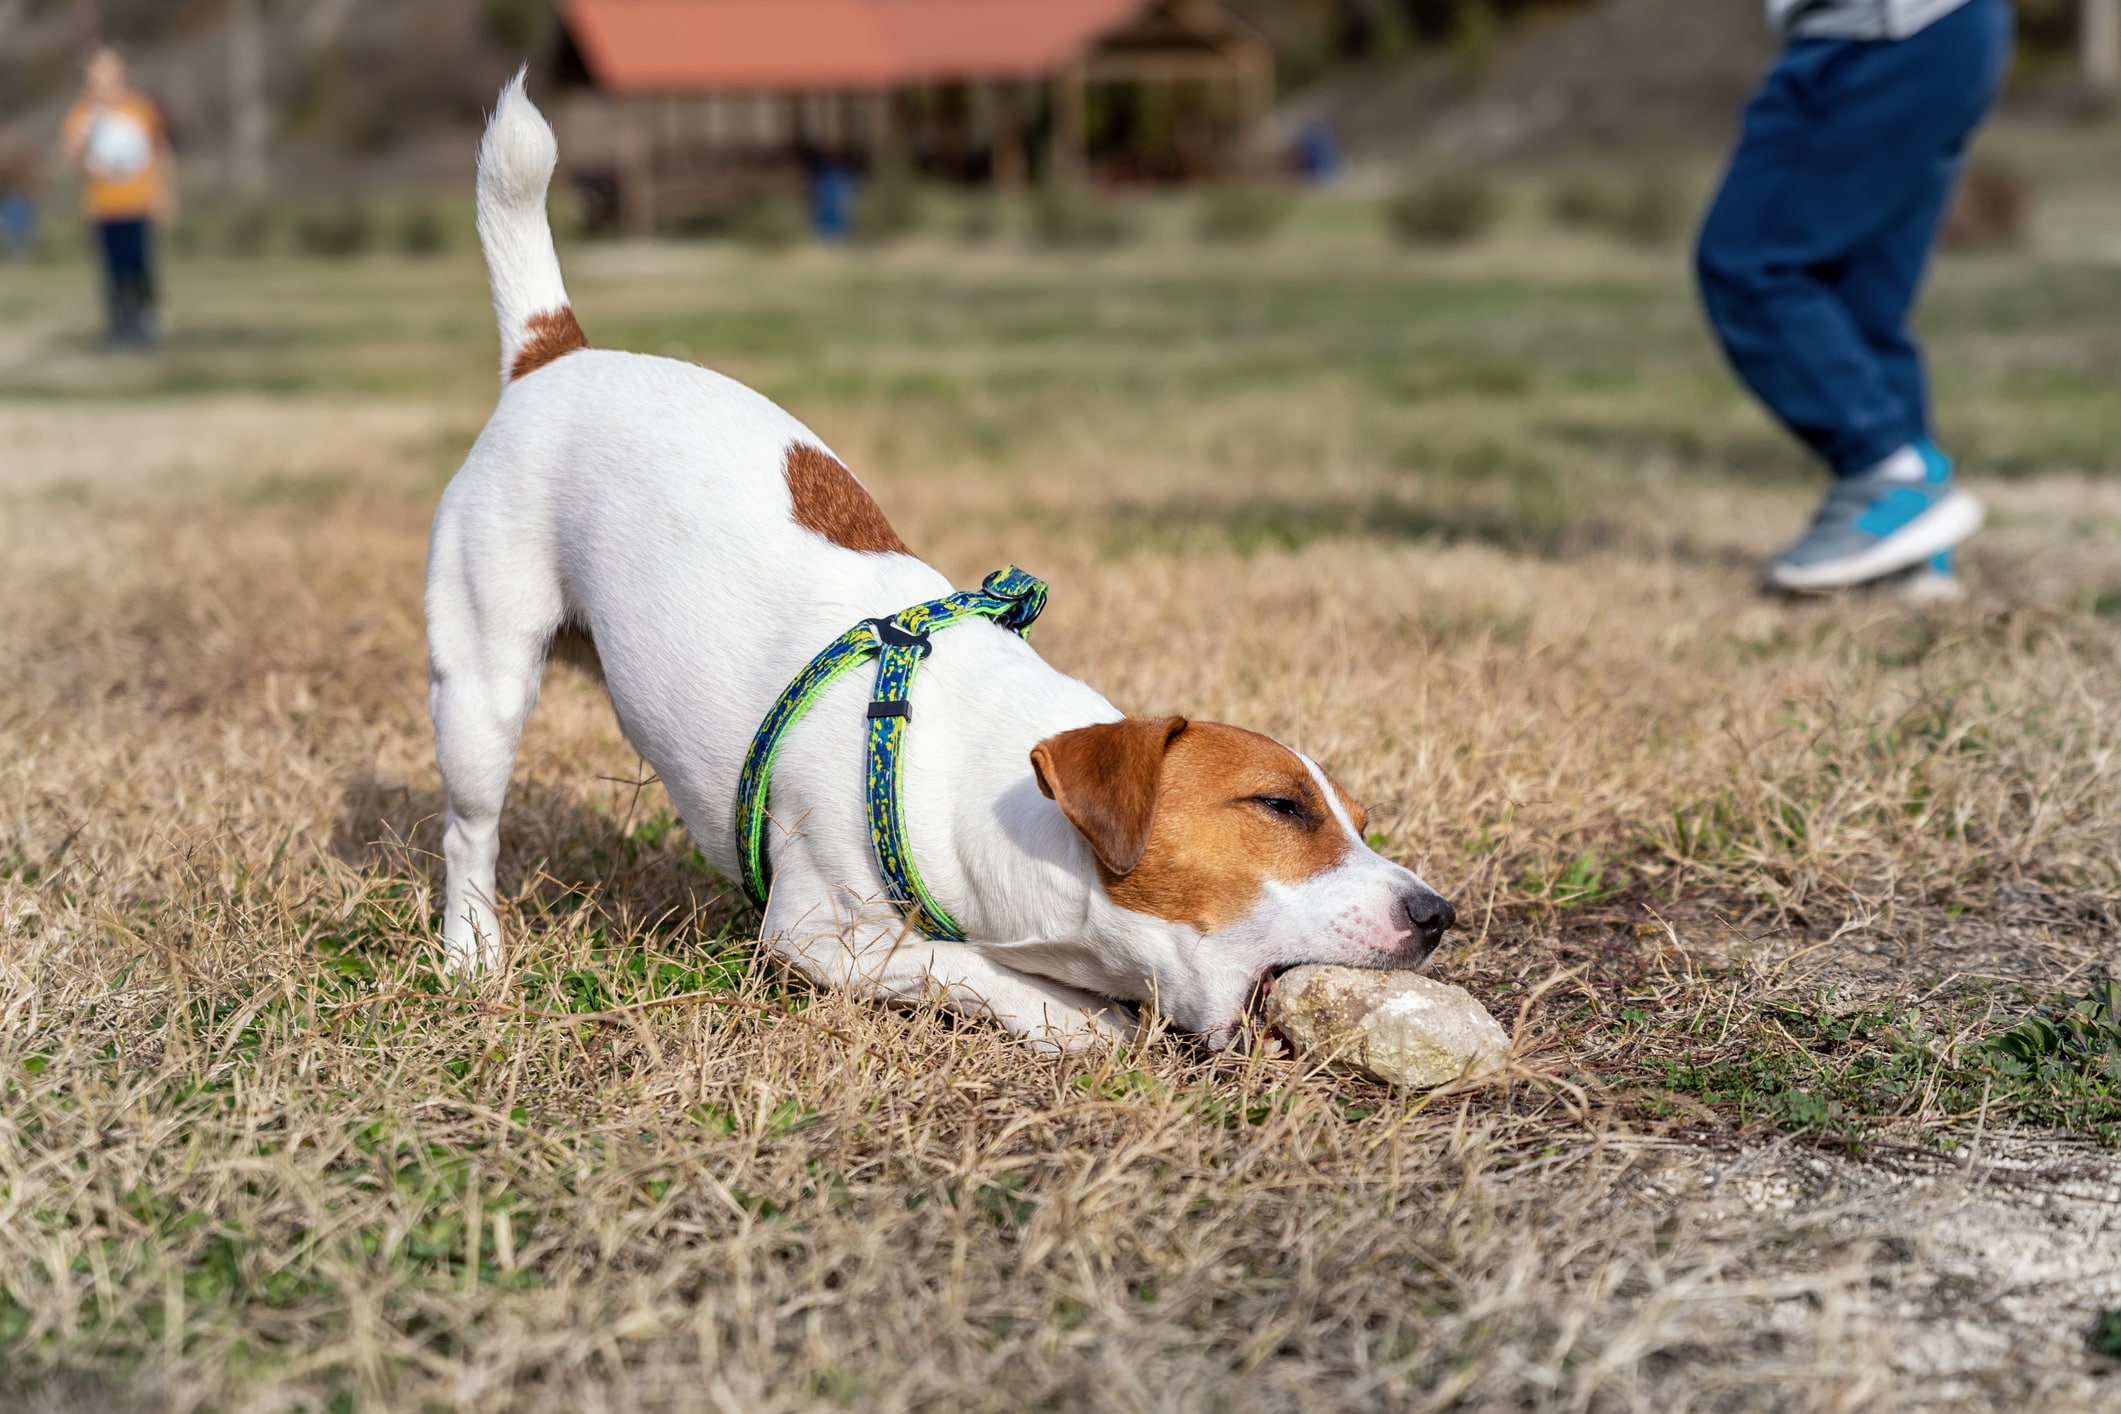 Cute small playful breed 1 year old jack russel terrier dog chewing and eating stones or rocks during walking at mountain forest park outdoors on bright sunny day. Funny active young pet play outside